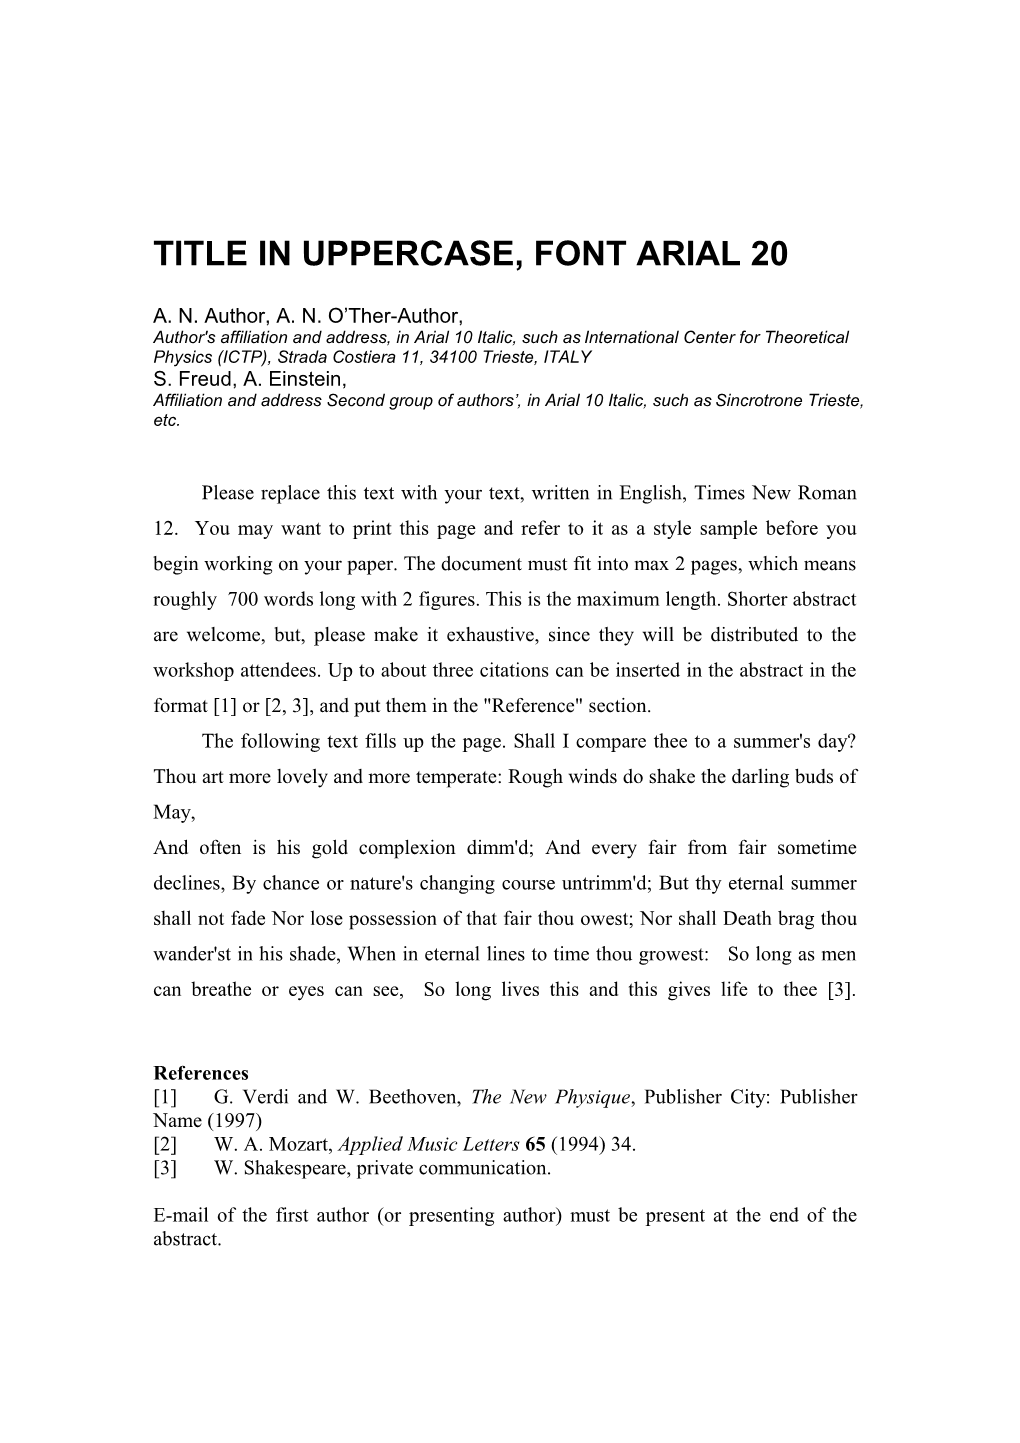 Title in Uppercase, Font Arial 20